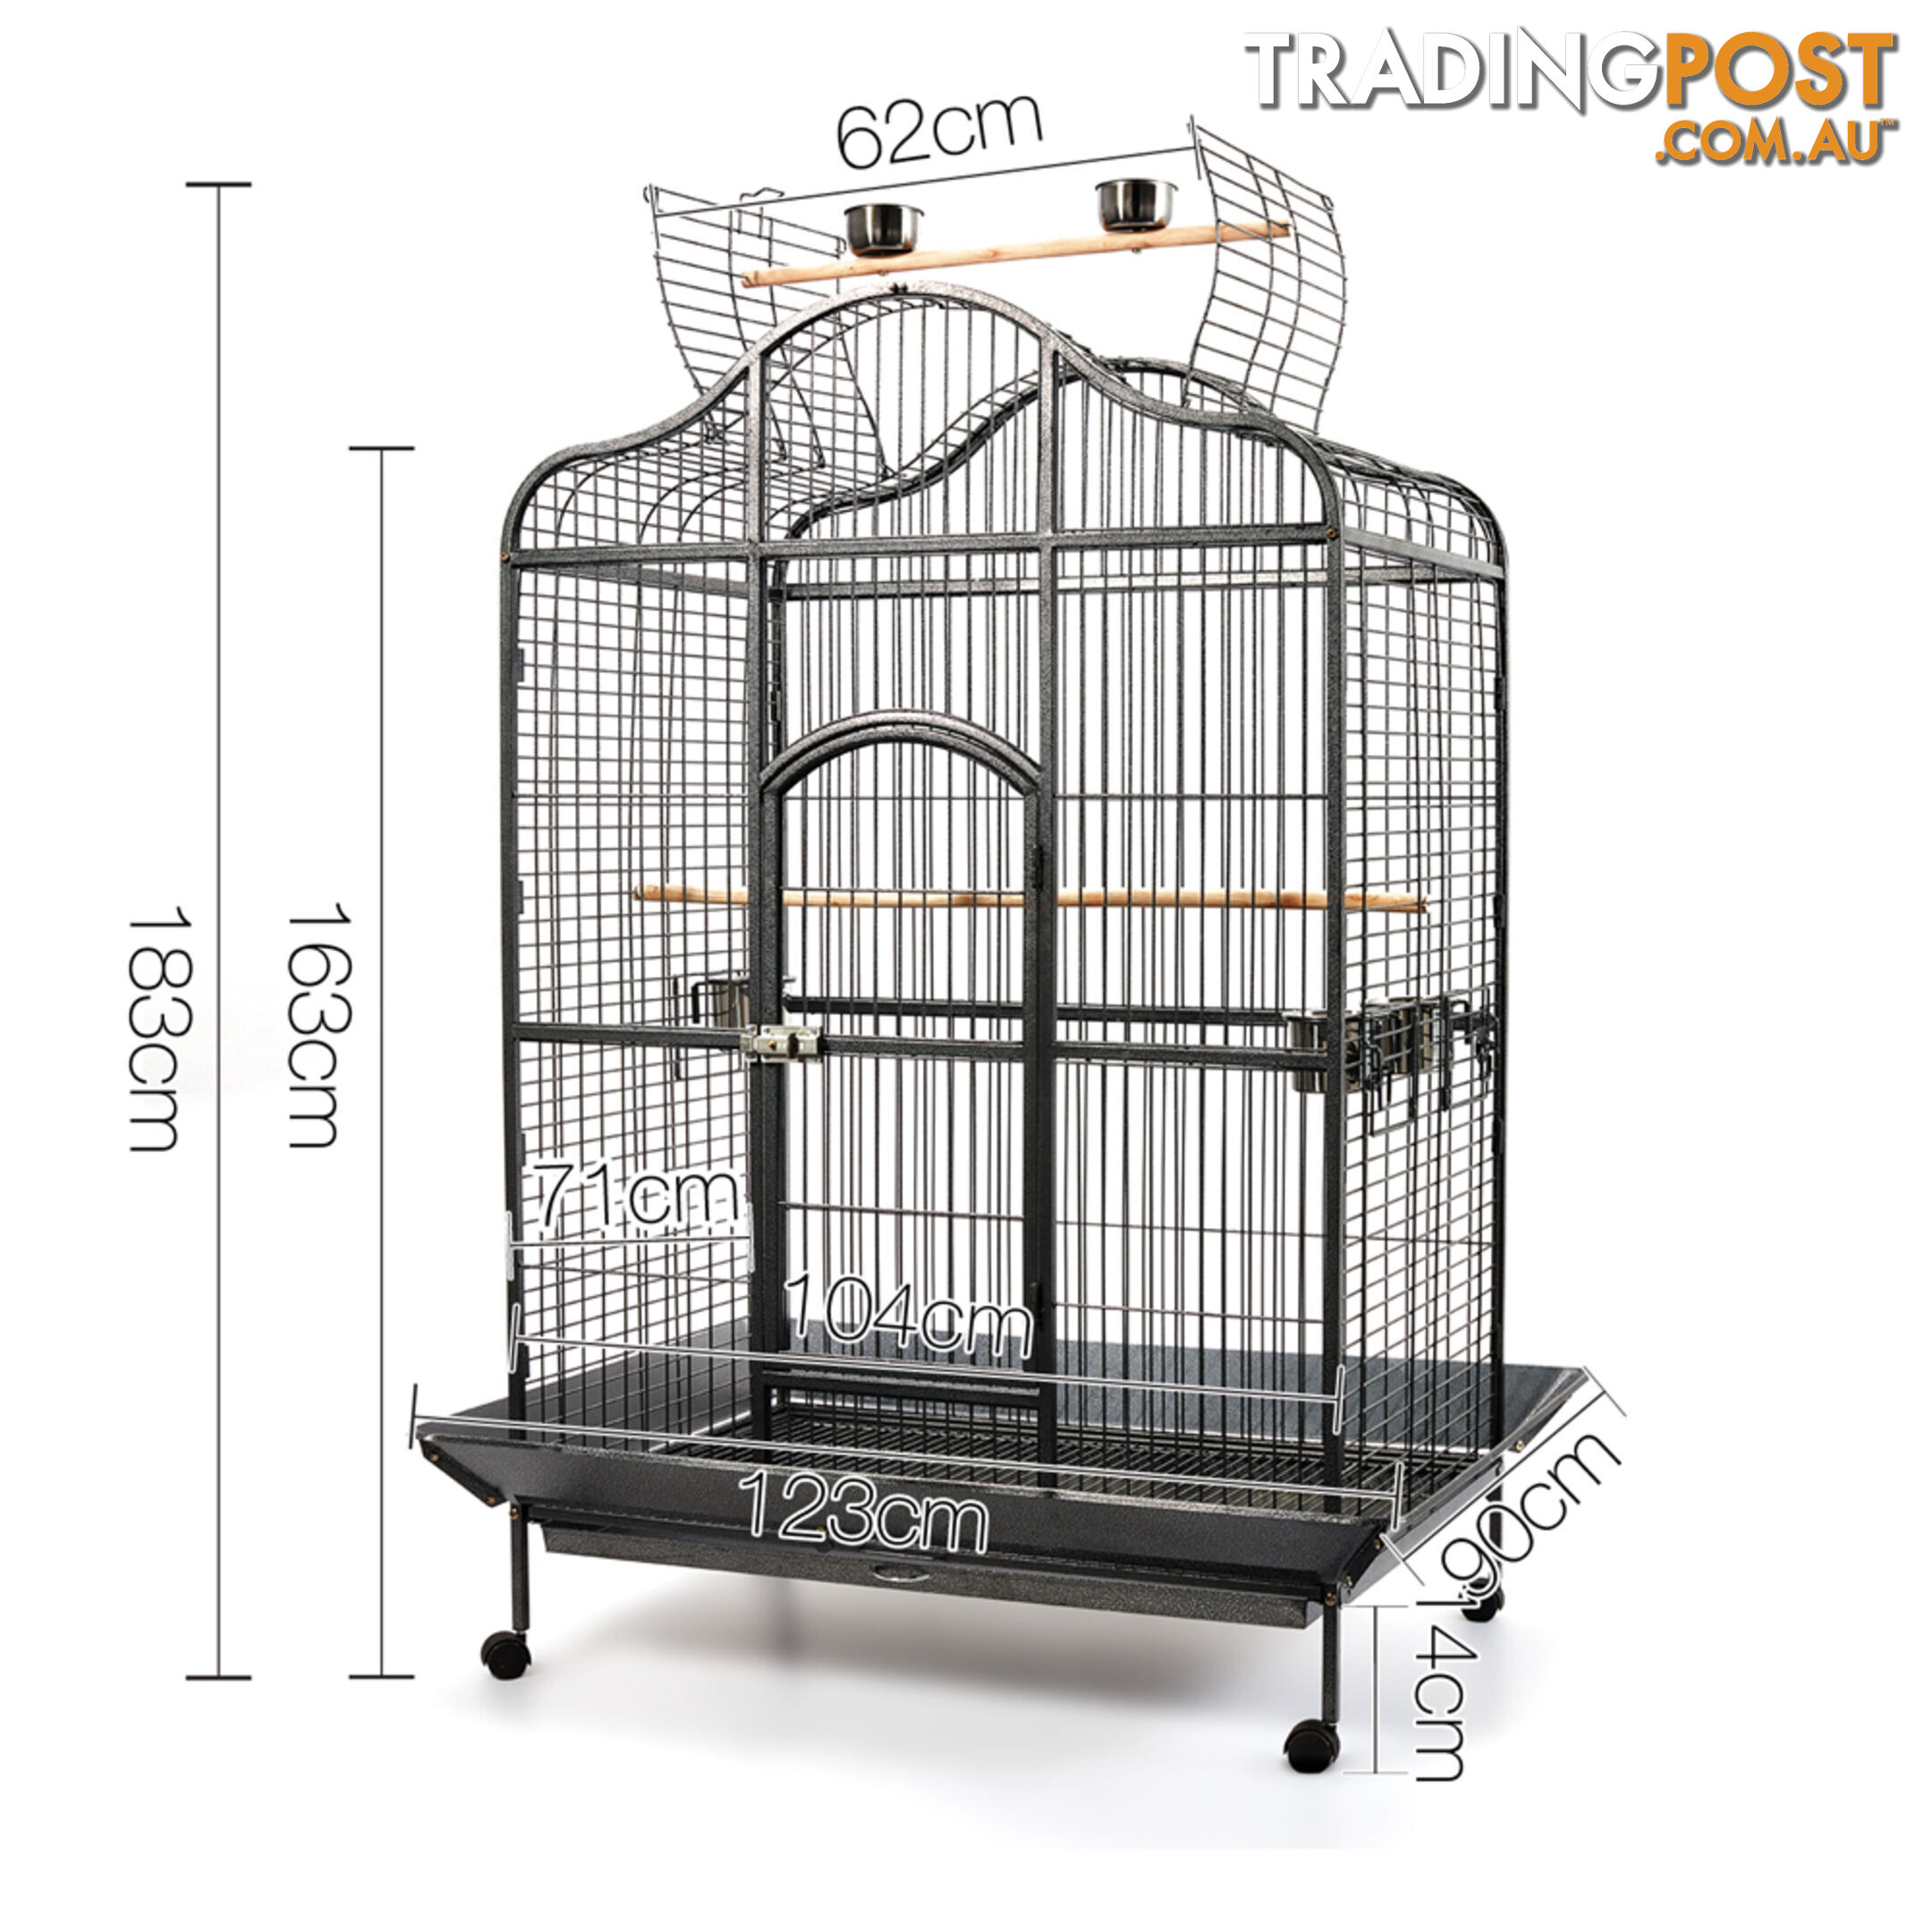 Large 183cm Bird Cage Canary Heavy Duty Parrot Budgie Pet Aviary Open Roof Black